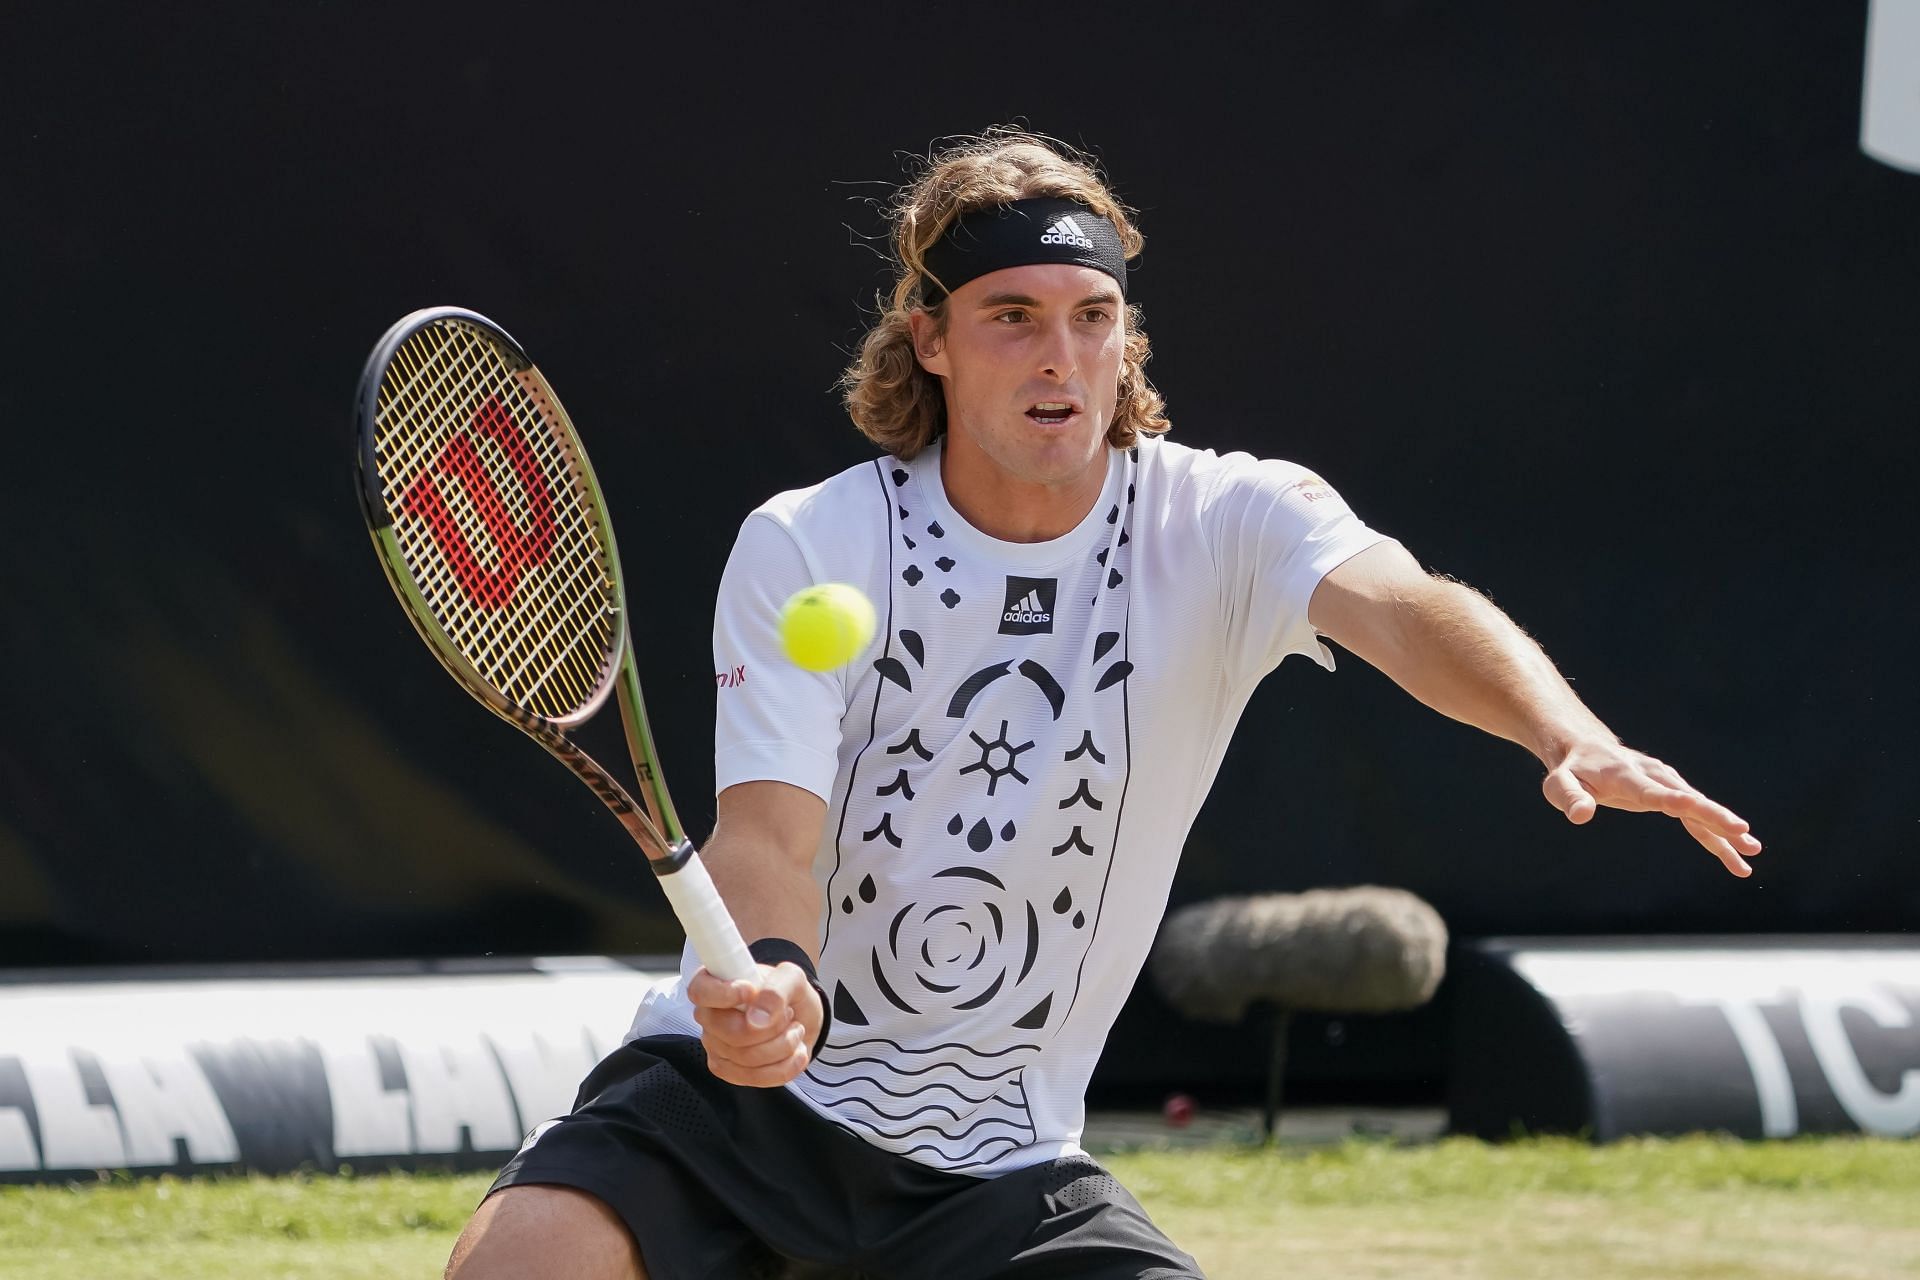 Tsitsipas in action on the grass courts this season